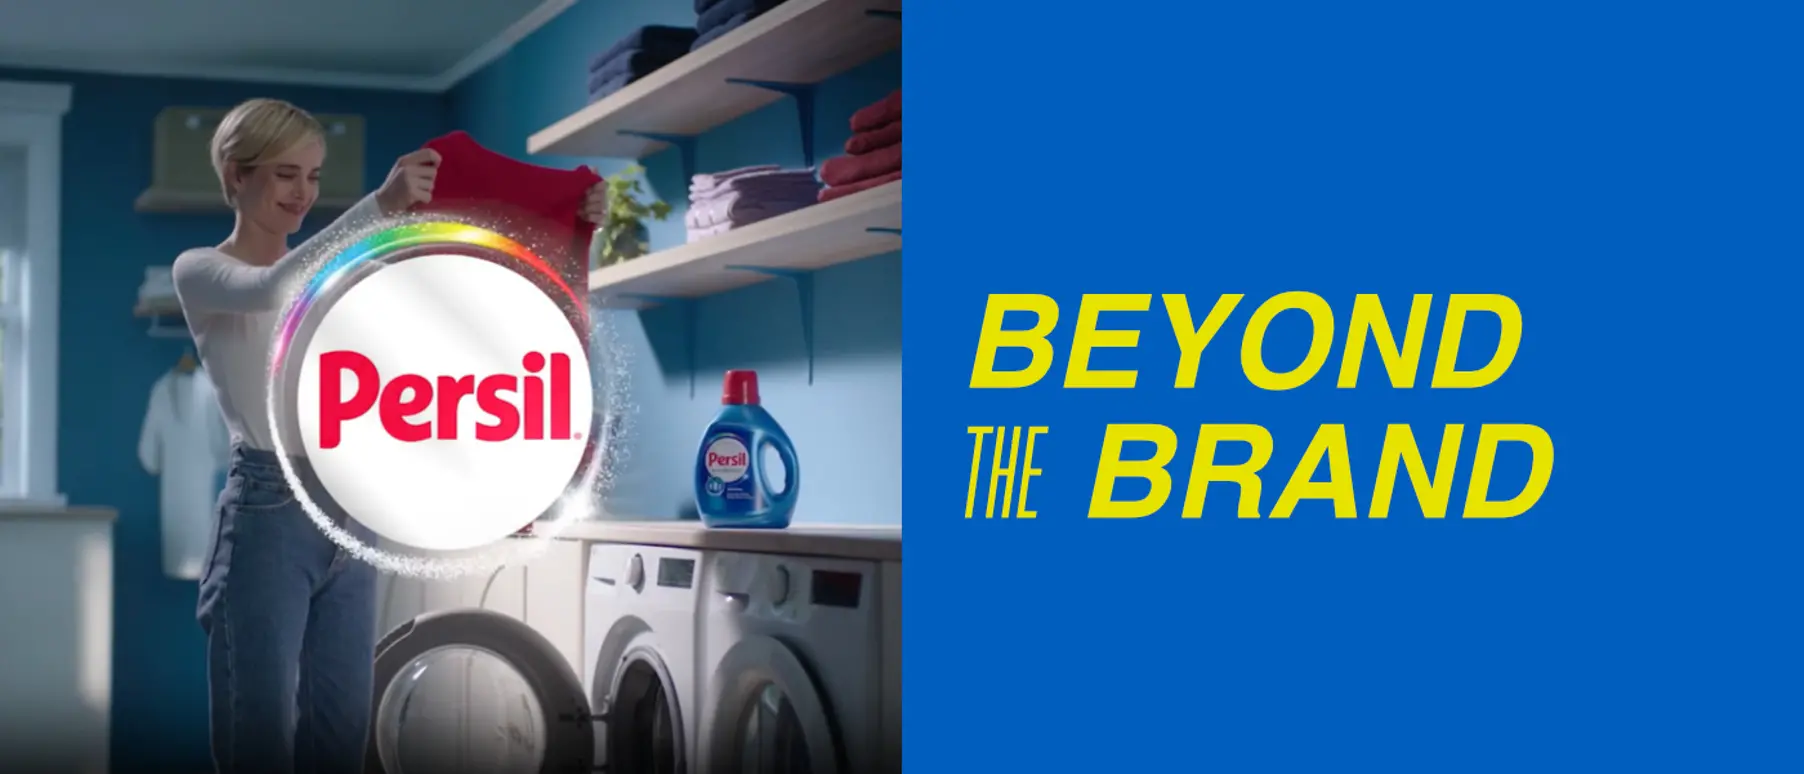 Woman in laundry room holding up clothes with Persil logo overlaid